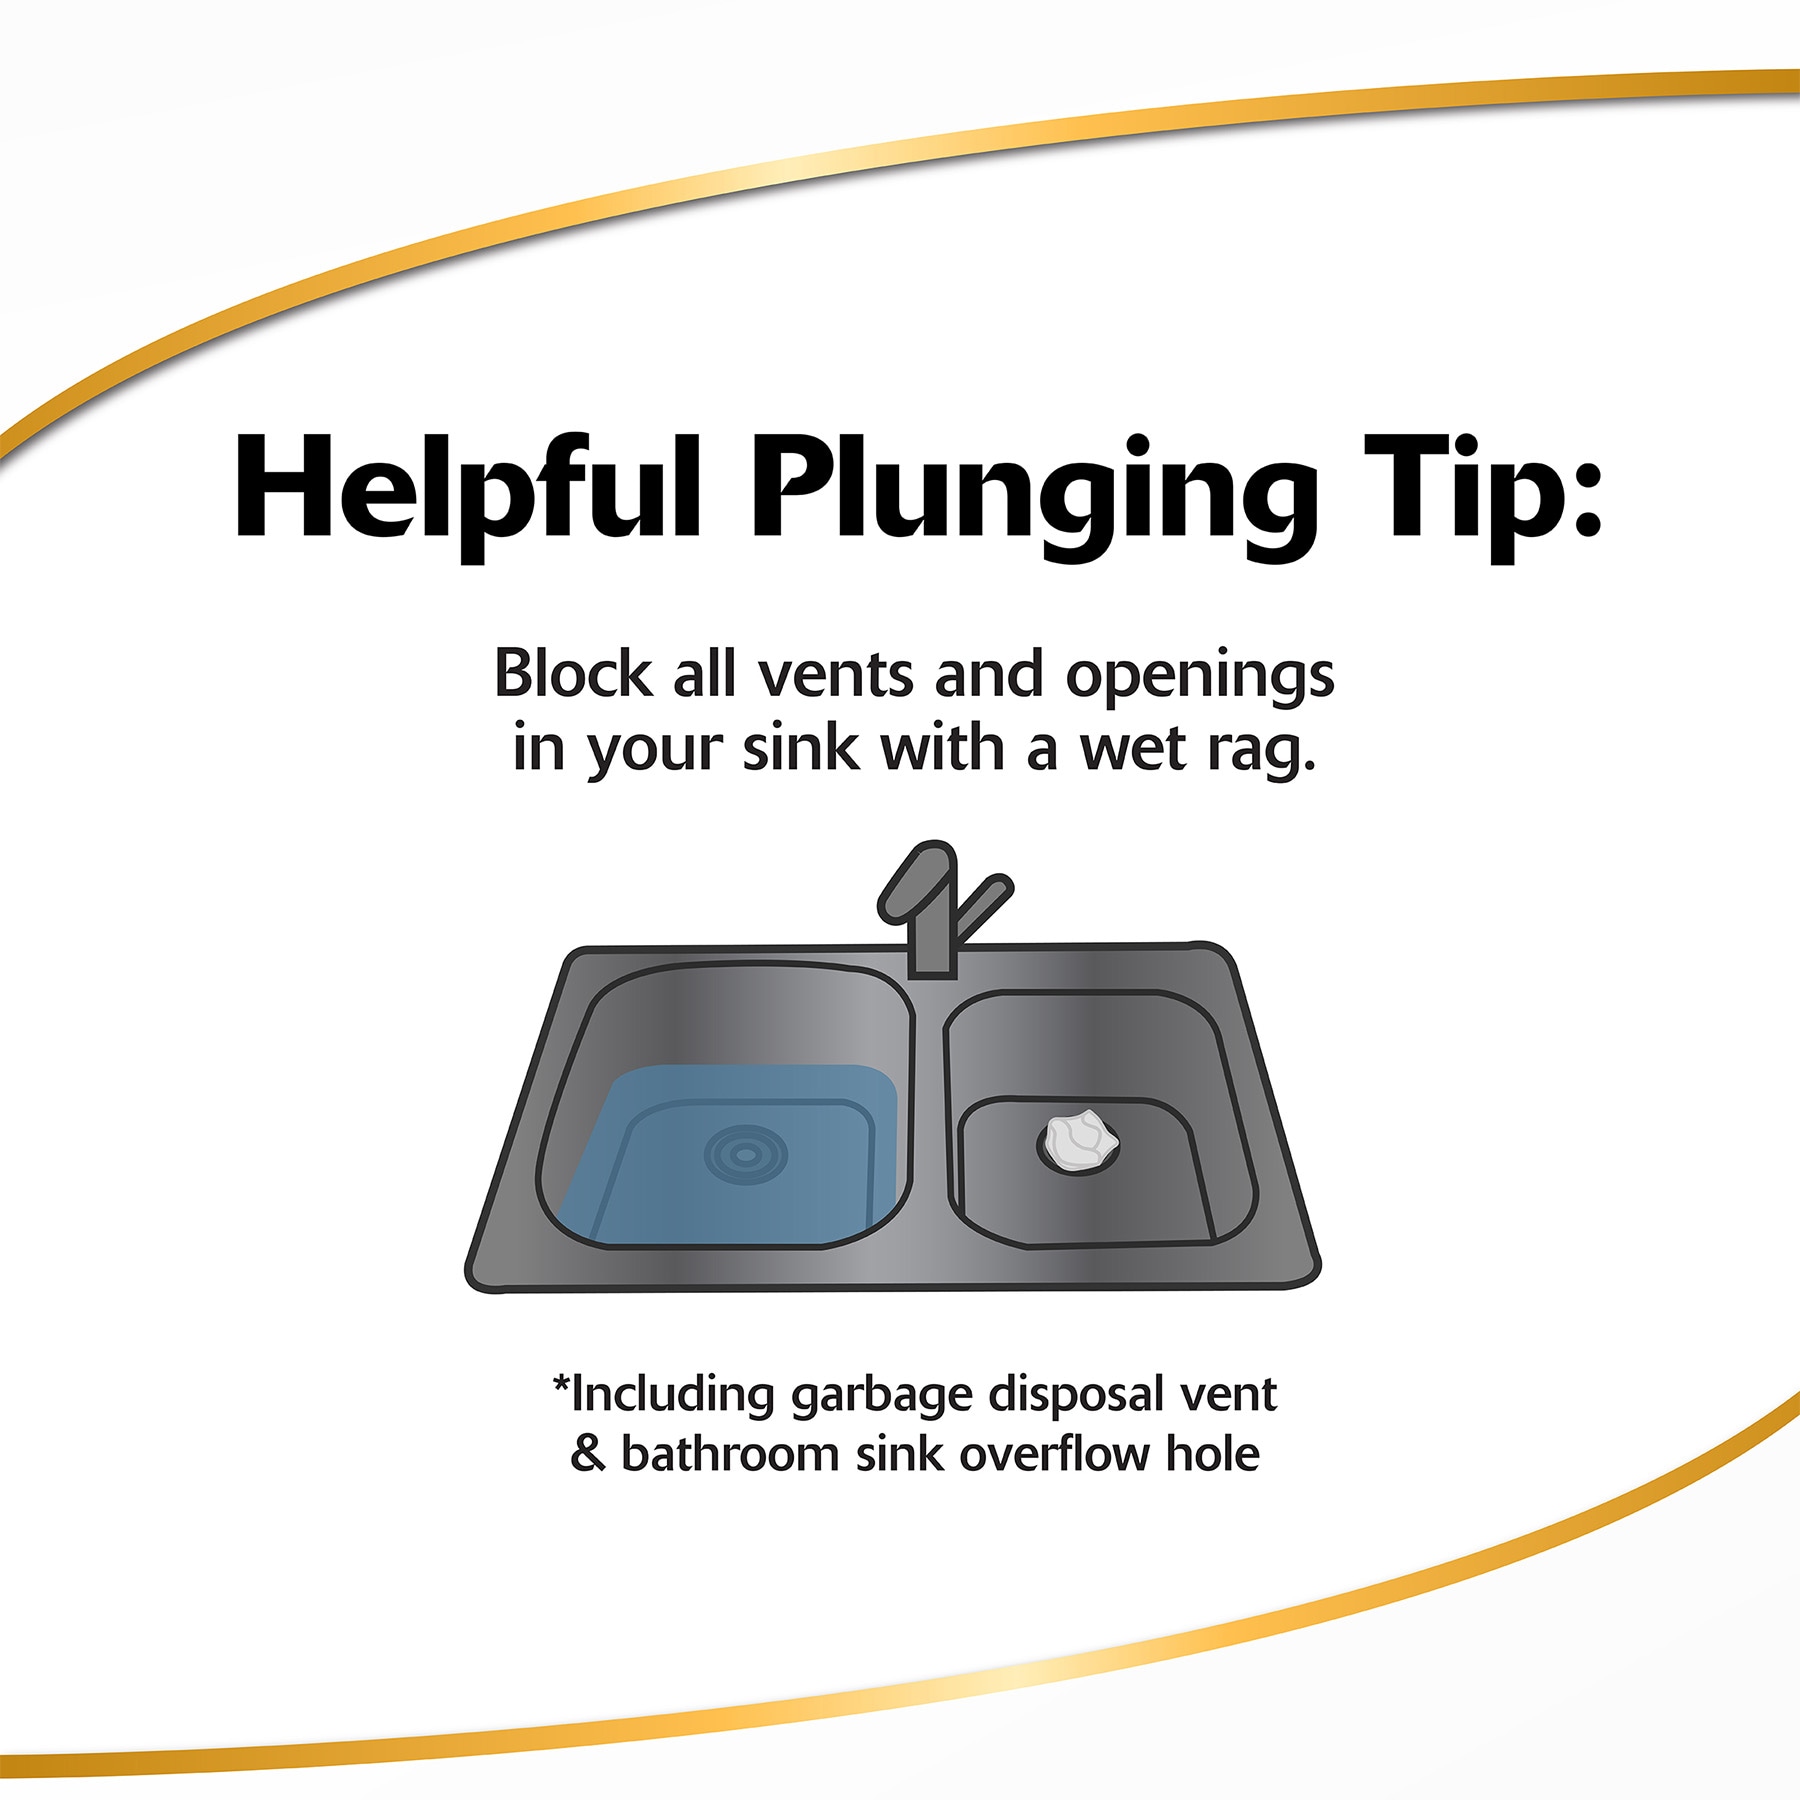 YSK how to use a plunger. Whether it's a sink, a bathtub, a shower, or a  toilet, clogged pipes are a common, and commonly fixed, problem. In most  cases, using a plunger